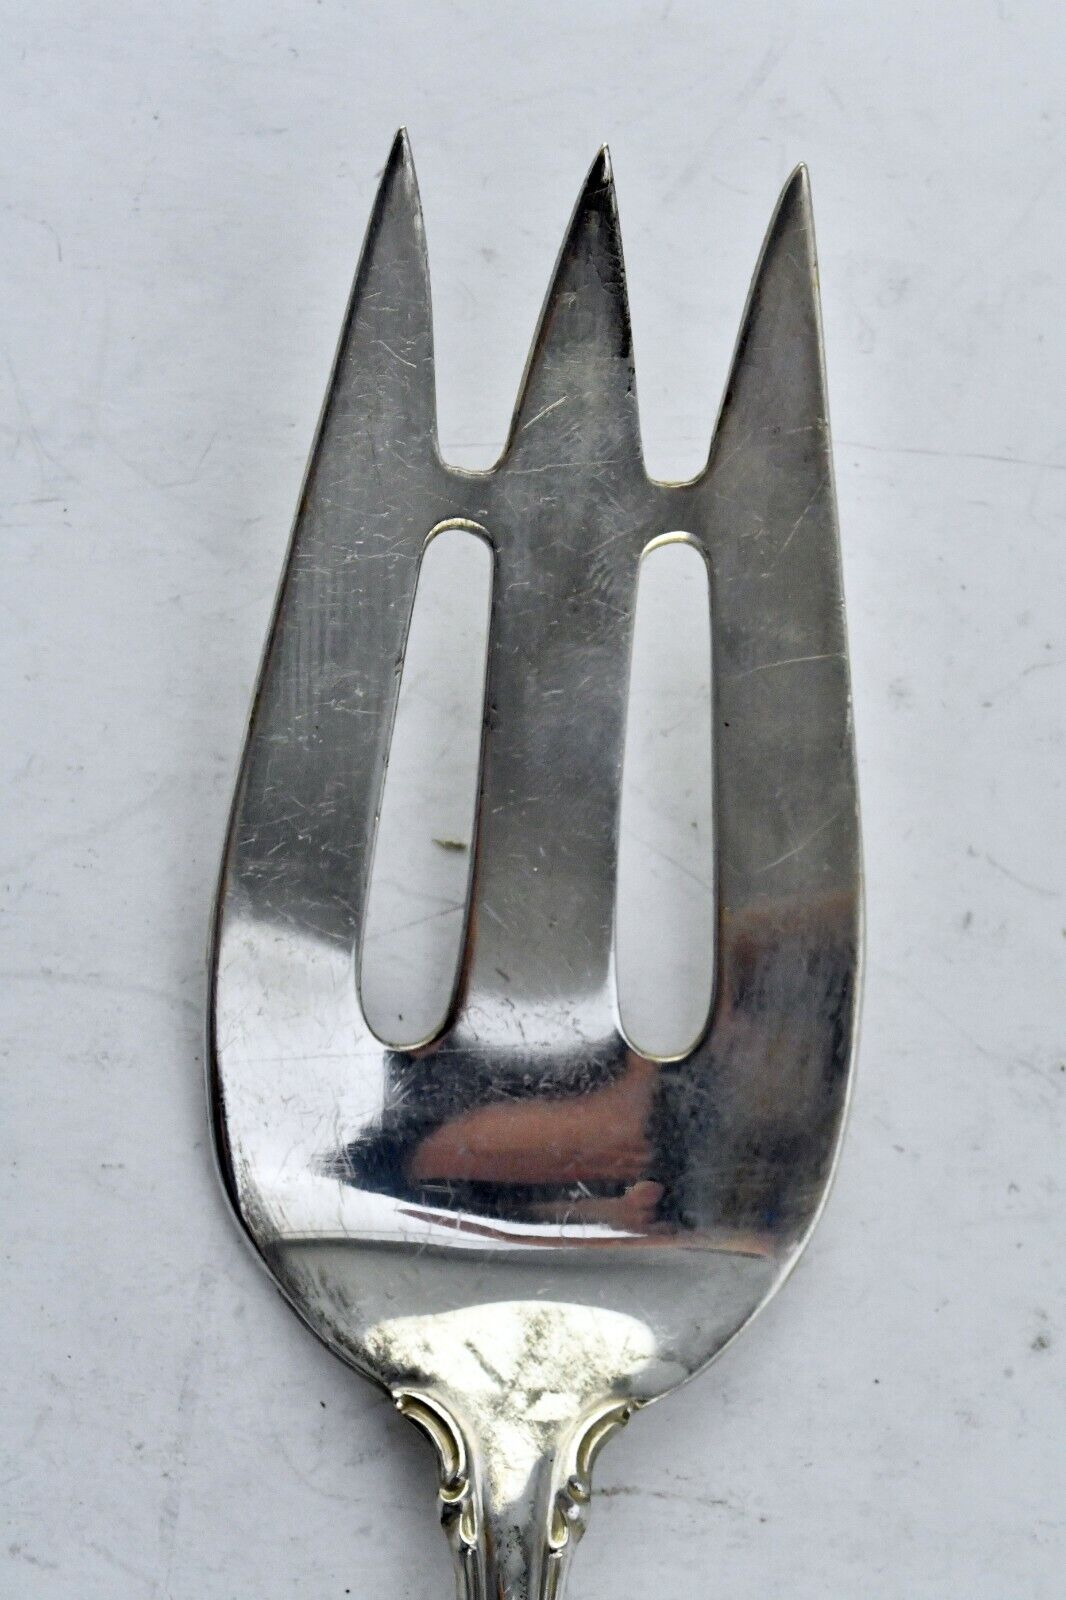 Legato by Towle Sterling Silver 9" Large Cold Meat Serving Fork 2.7 oz.